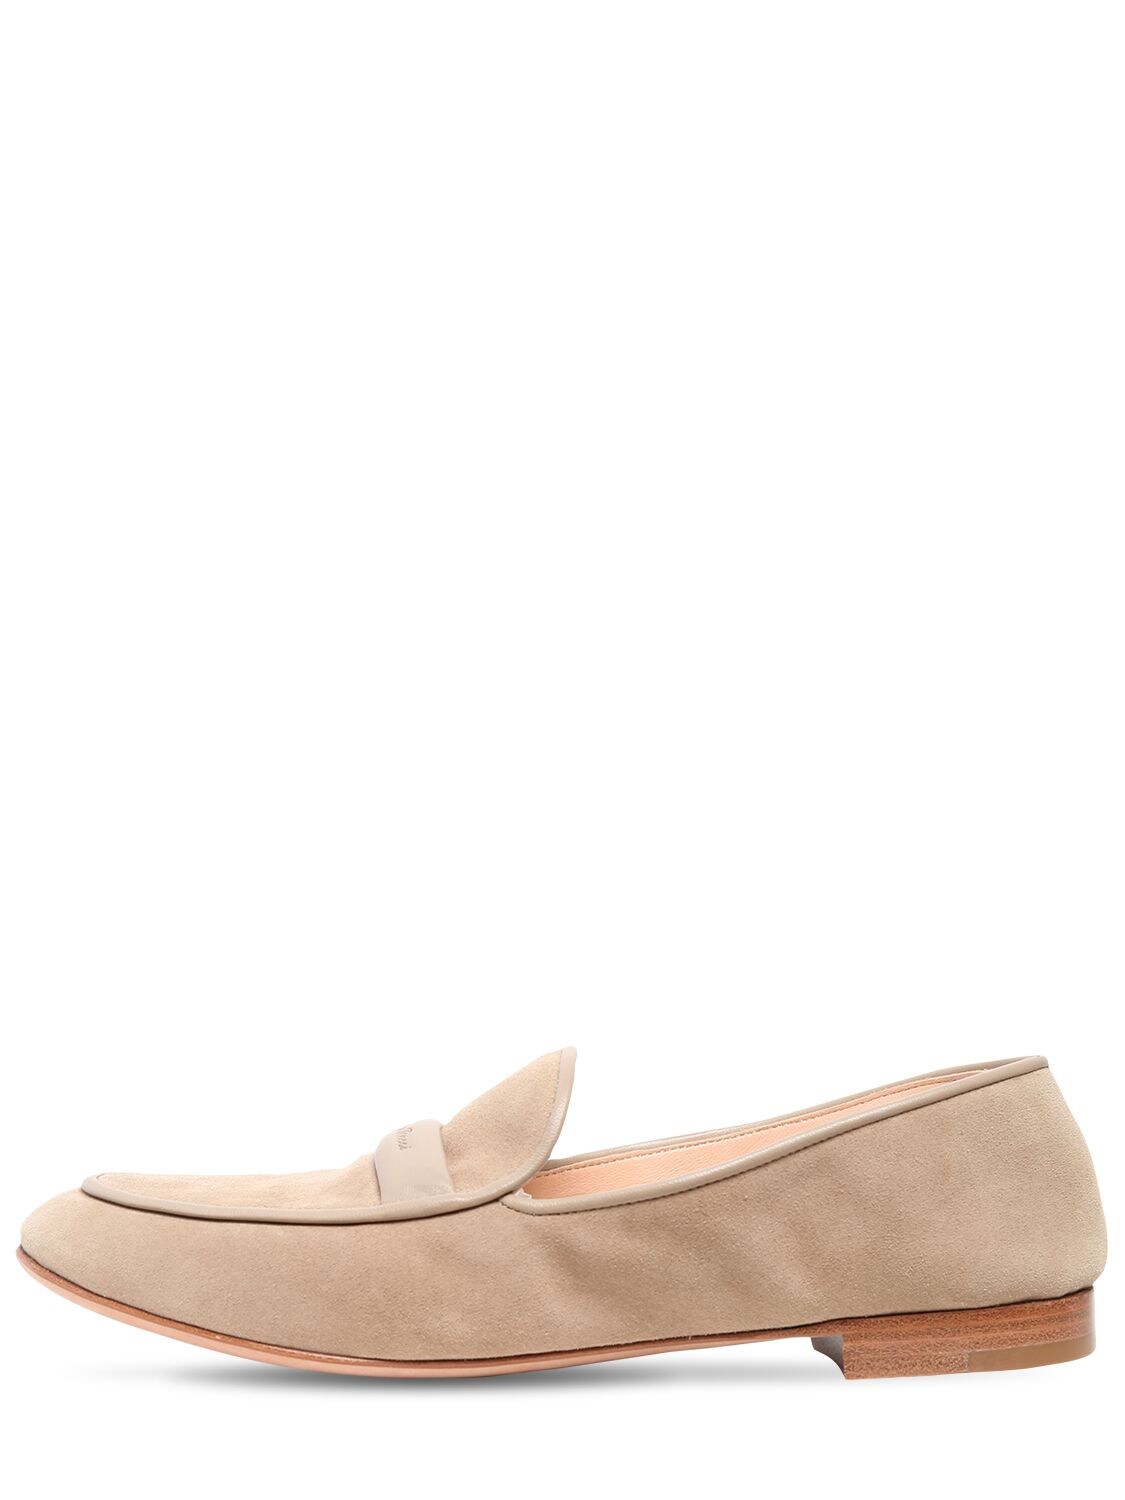 Gianvito Rossi 10mm Maxime Suede Loafers In Beige